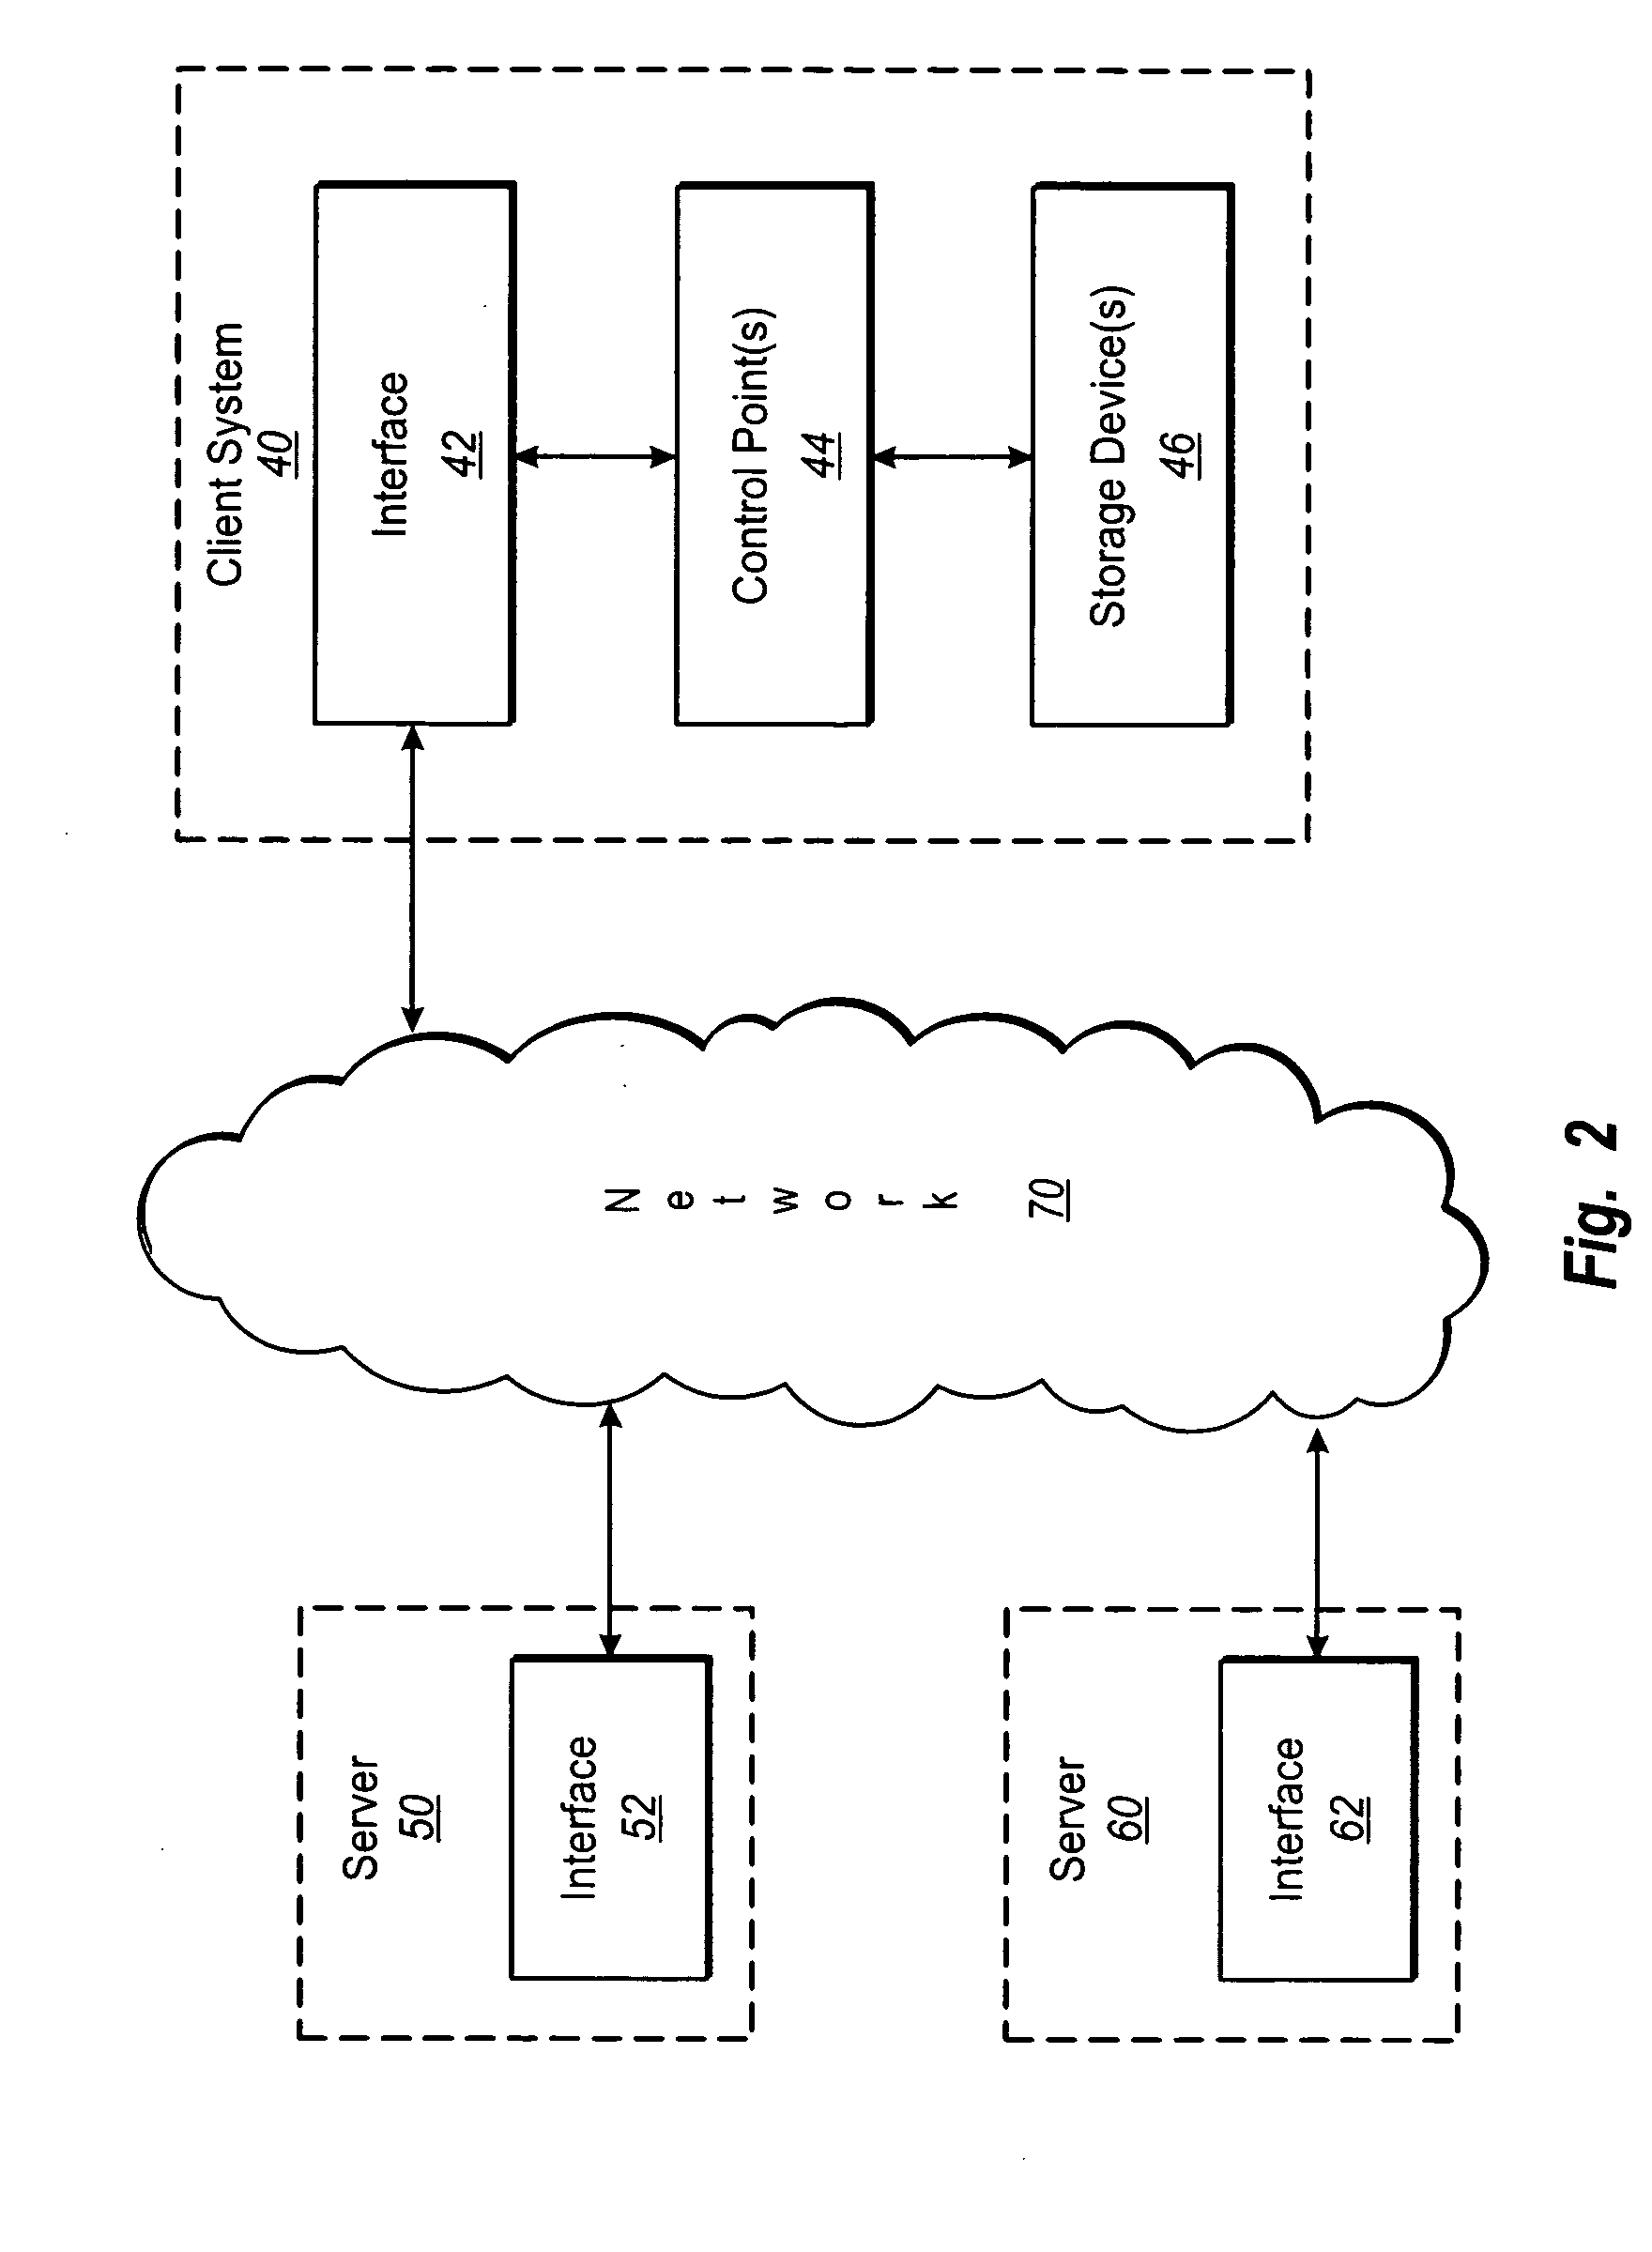 Systems and methods for providing remote camera control